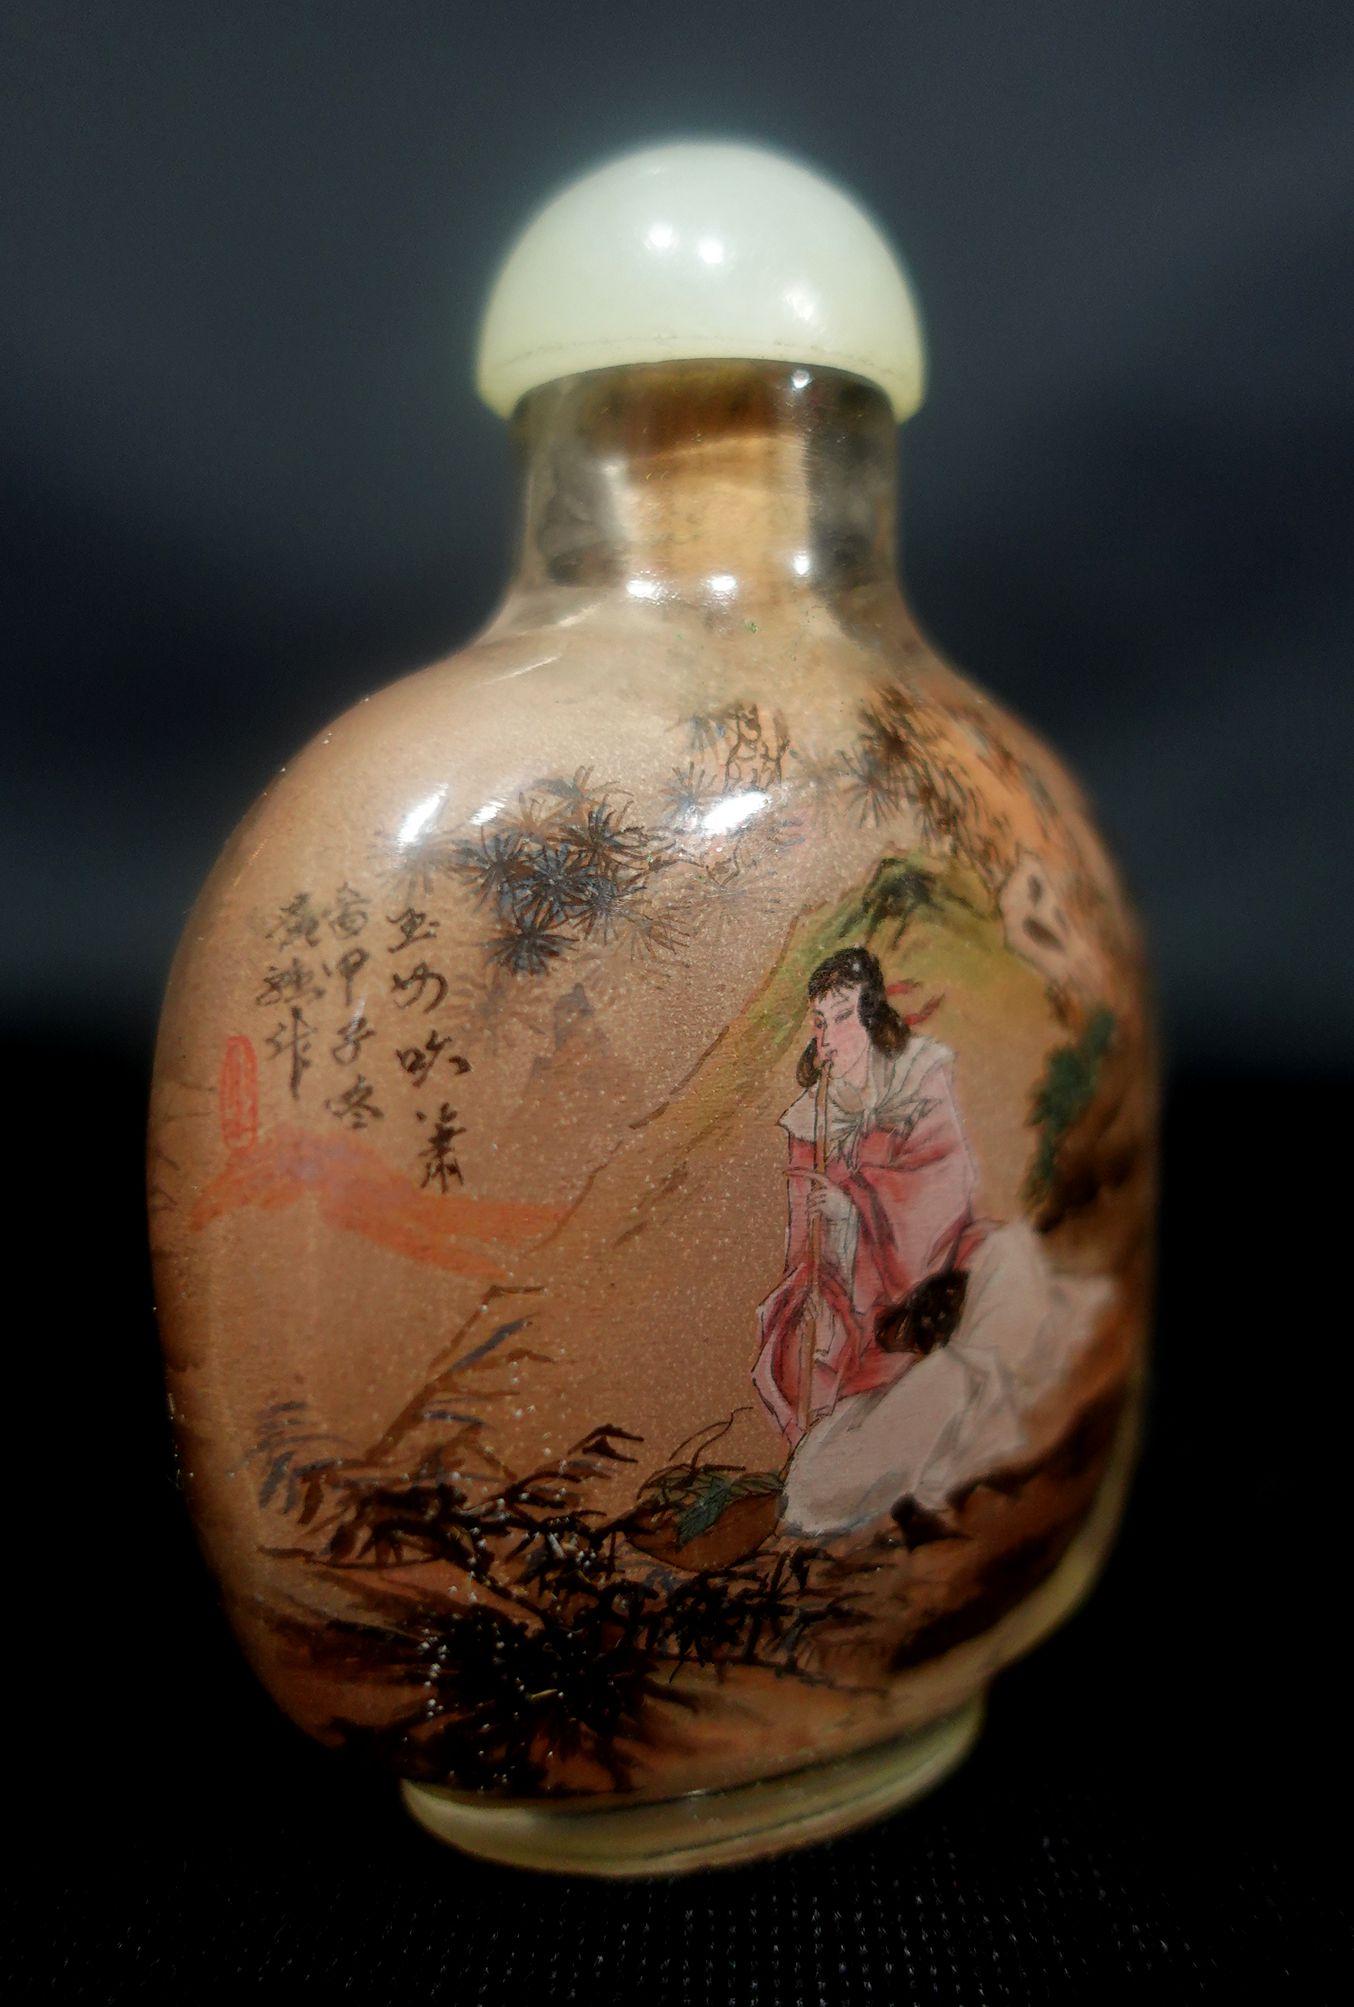 Chinese Interior-Painted Glass Snuff Bottle, signed with calligraphy, C. 1864, very well painted inside of glass depicting figures and landscaping on both sides in colors.

 